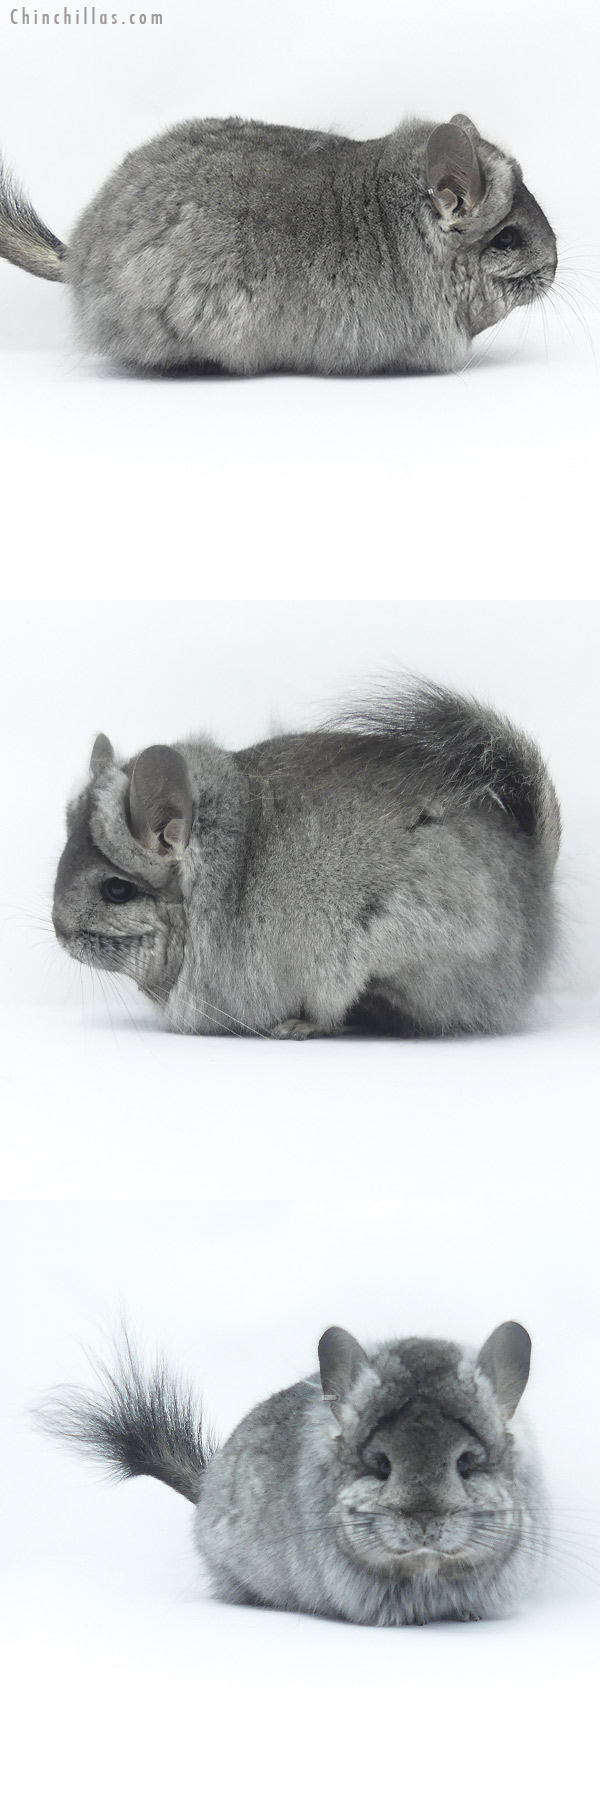 Chinchilla or related item offered for sale or export on Chinchillas.com - 19415 Large Blocky Standard ( Ebony & Locken Carrier ) G3  Royal Persian Angora Female Chinchilla